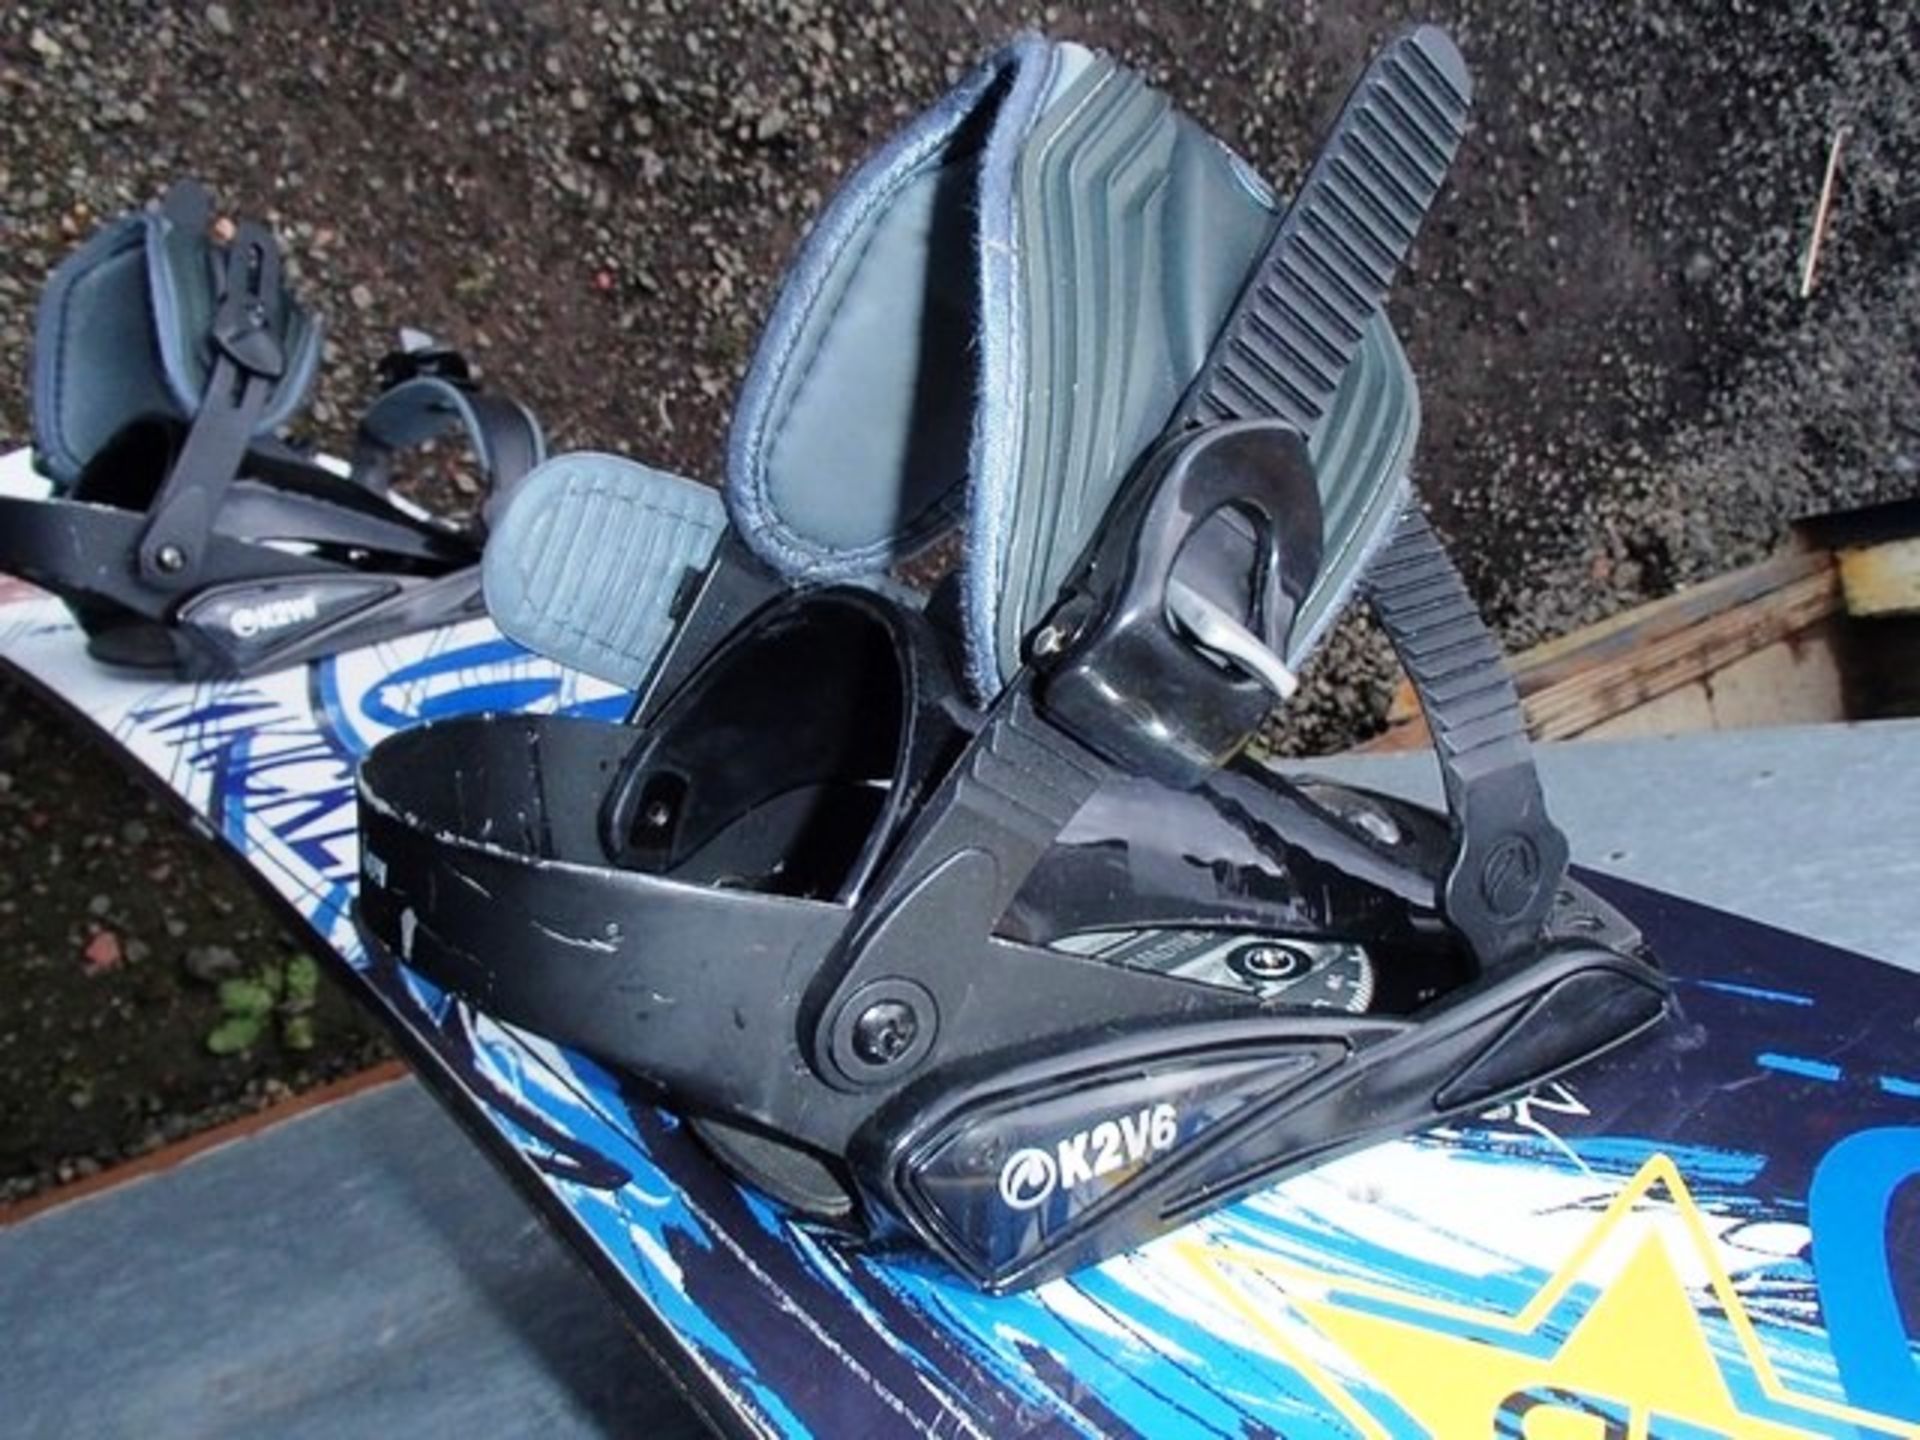 AIRTRACK SNOWBOARD WITH K2V6 BINDINGS. RECENTLY BEEN WAXED - Image 2 of 3